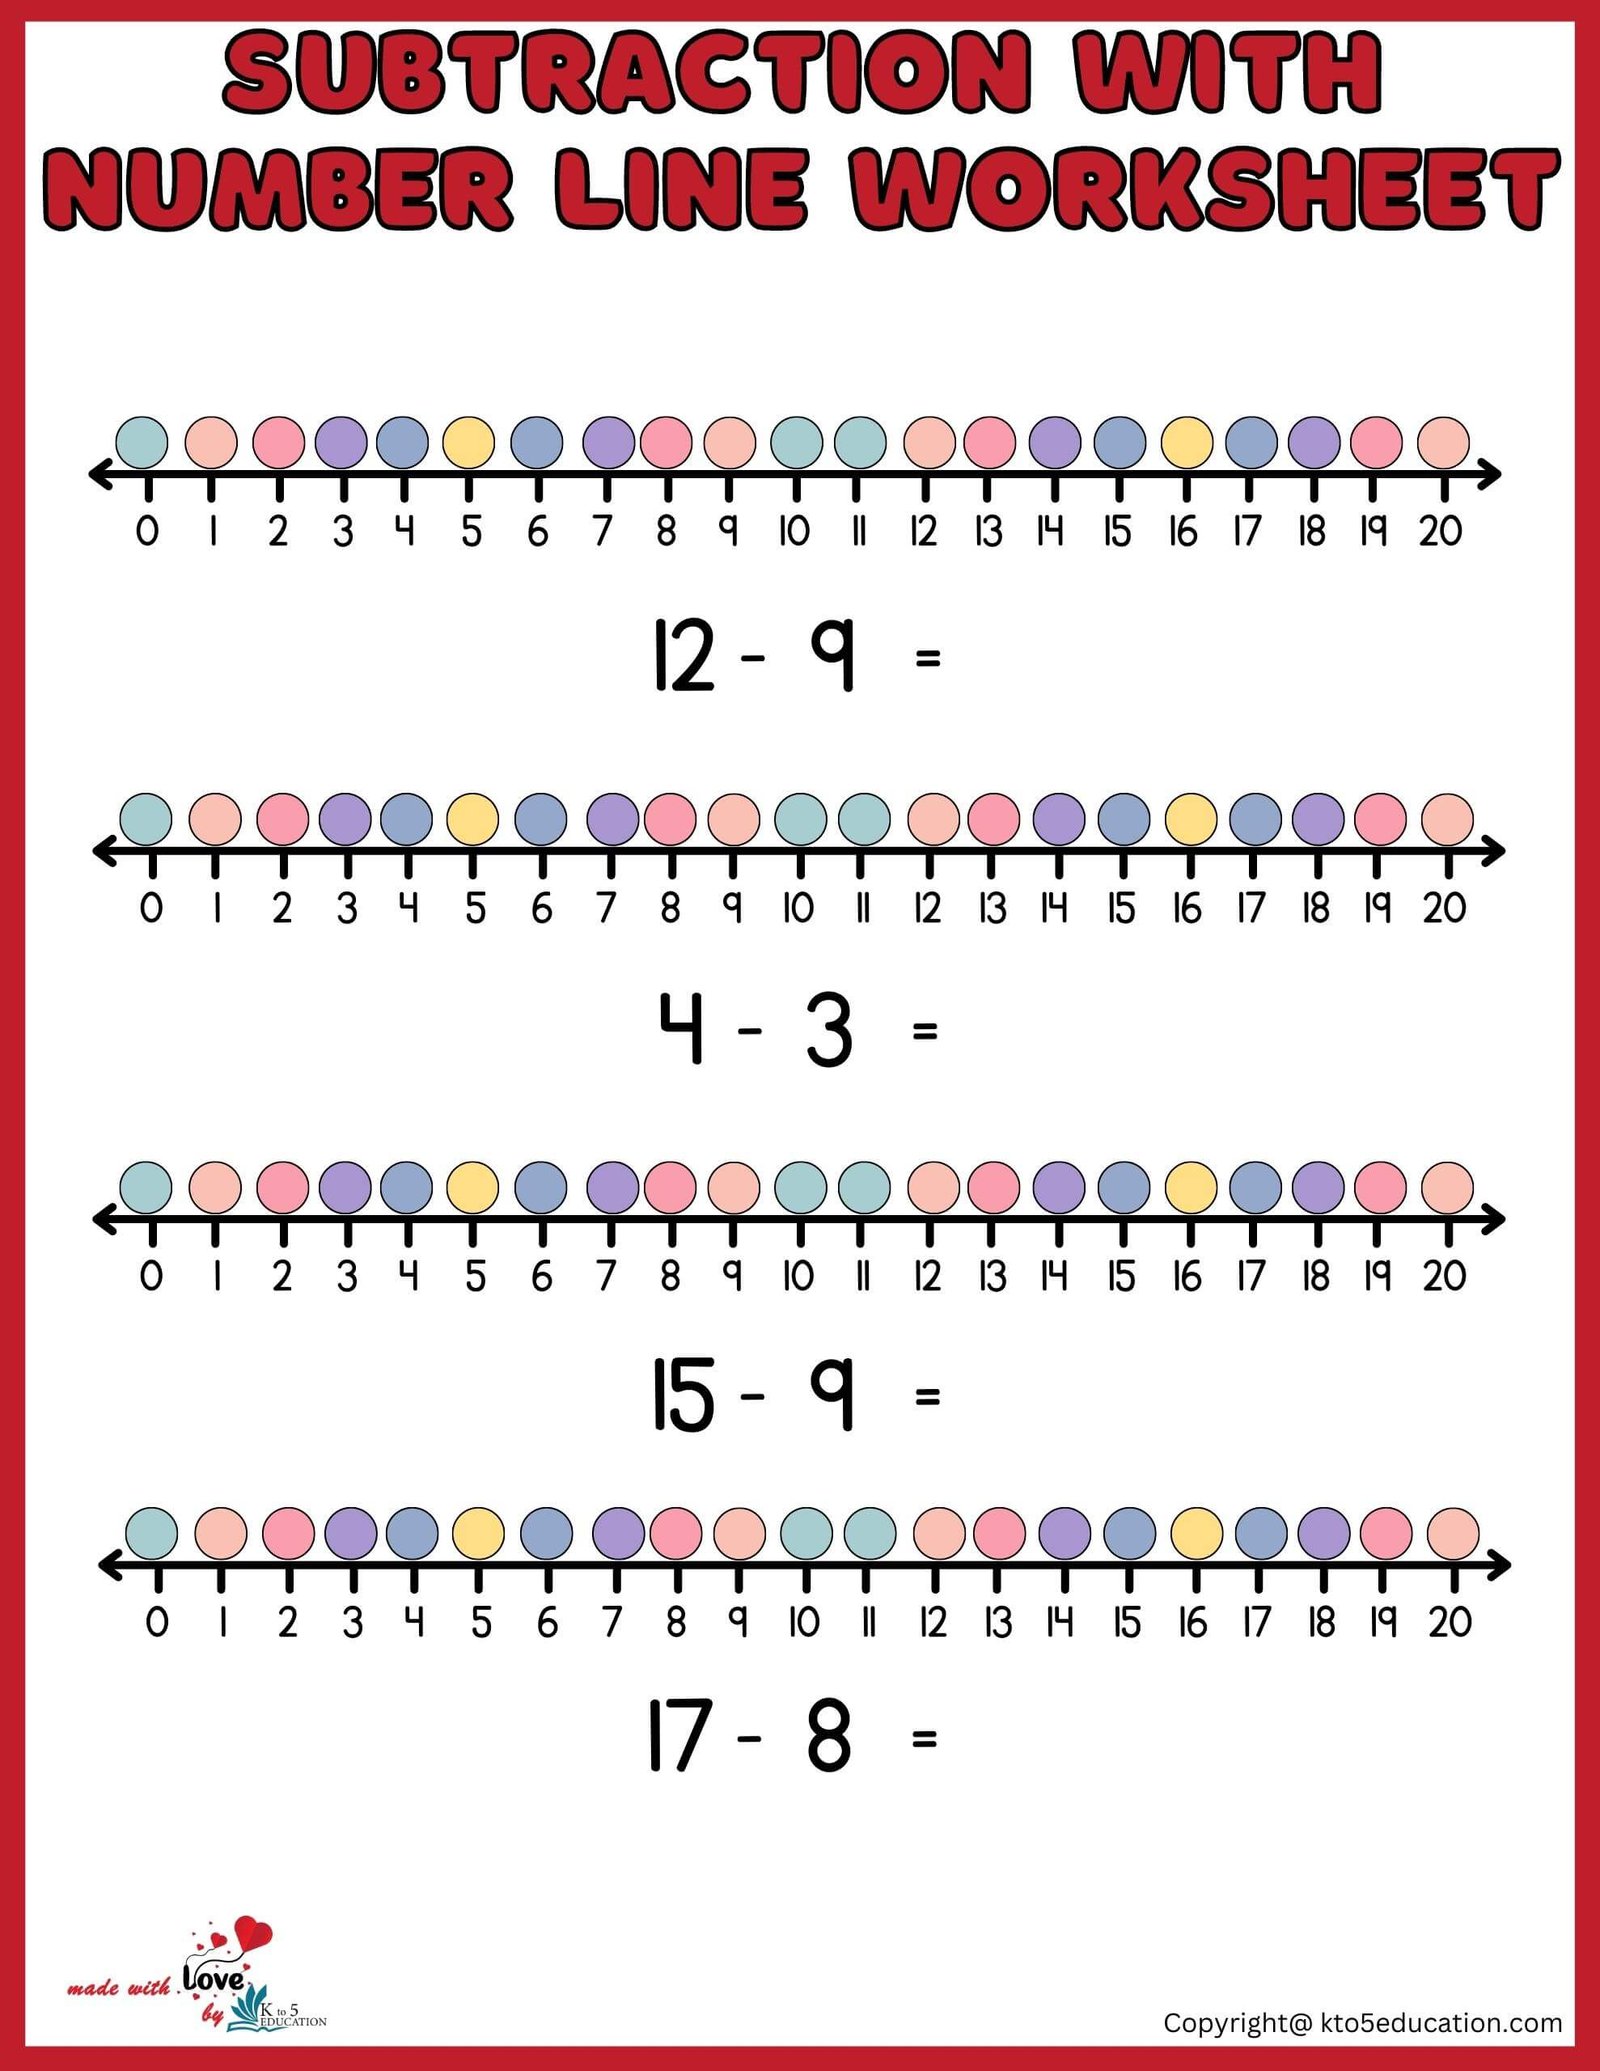 Free Subtraction With Number Line Worksheet 1-20 For Online Practice